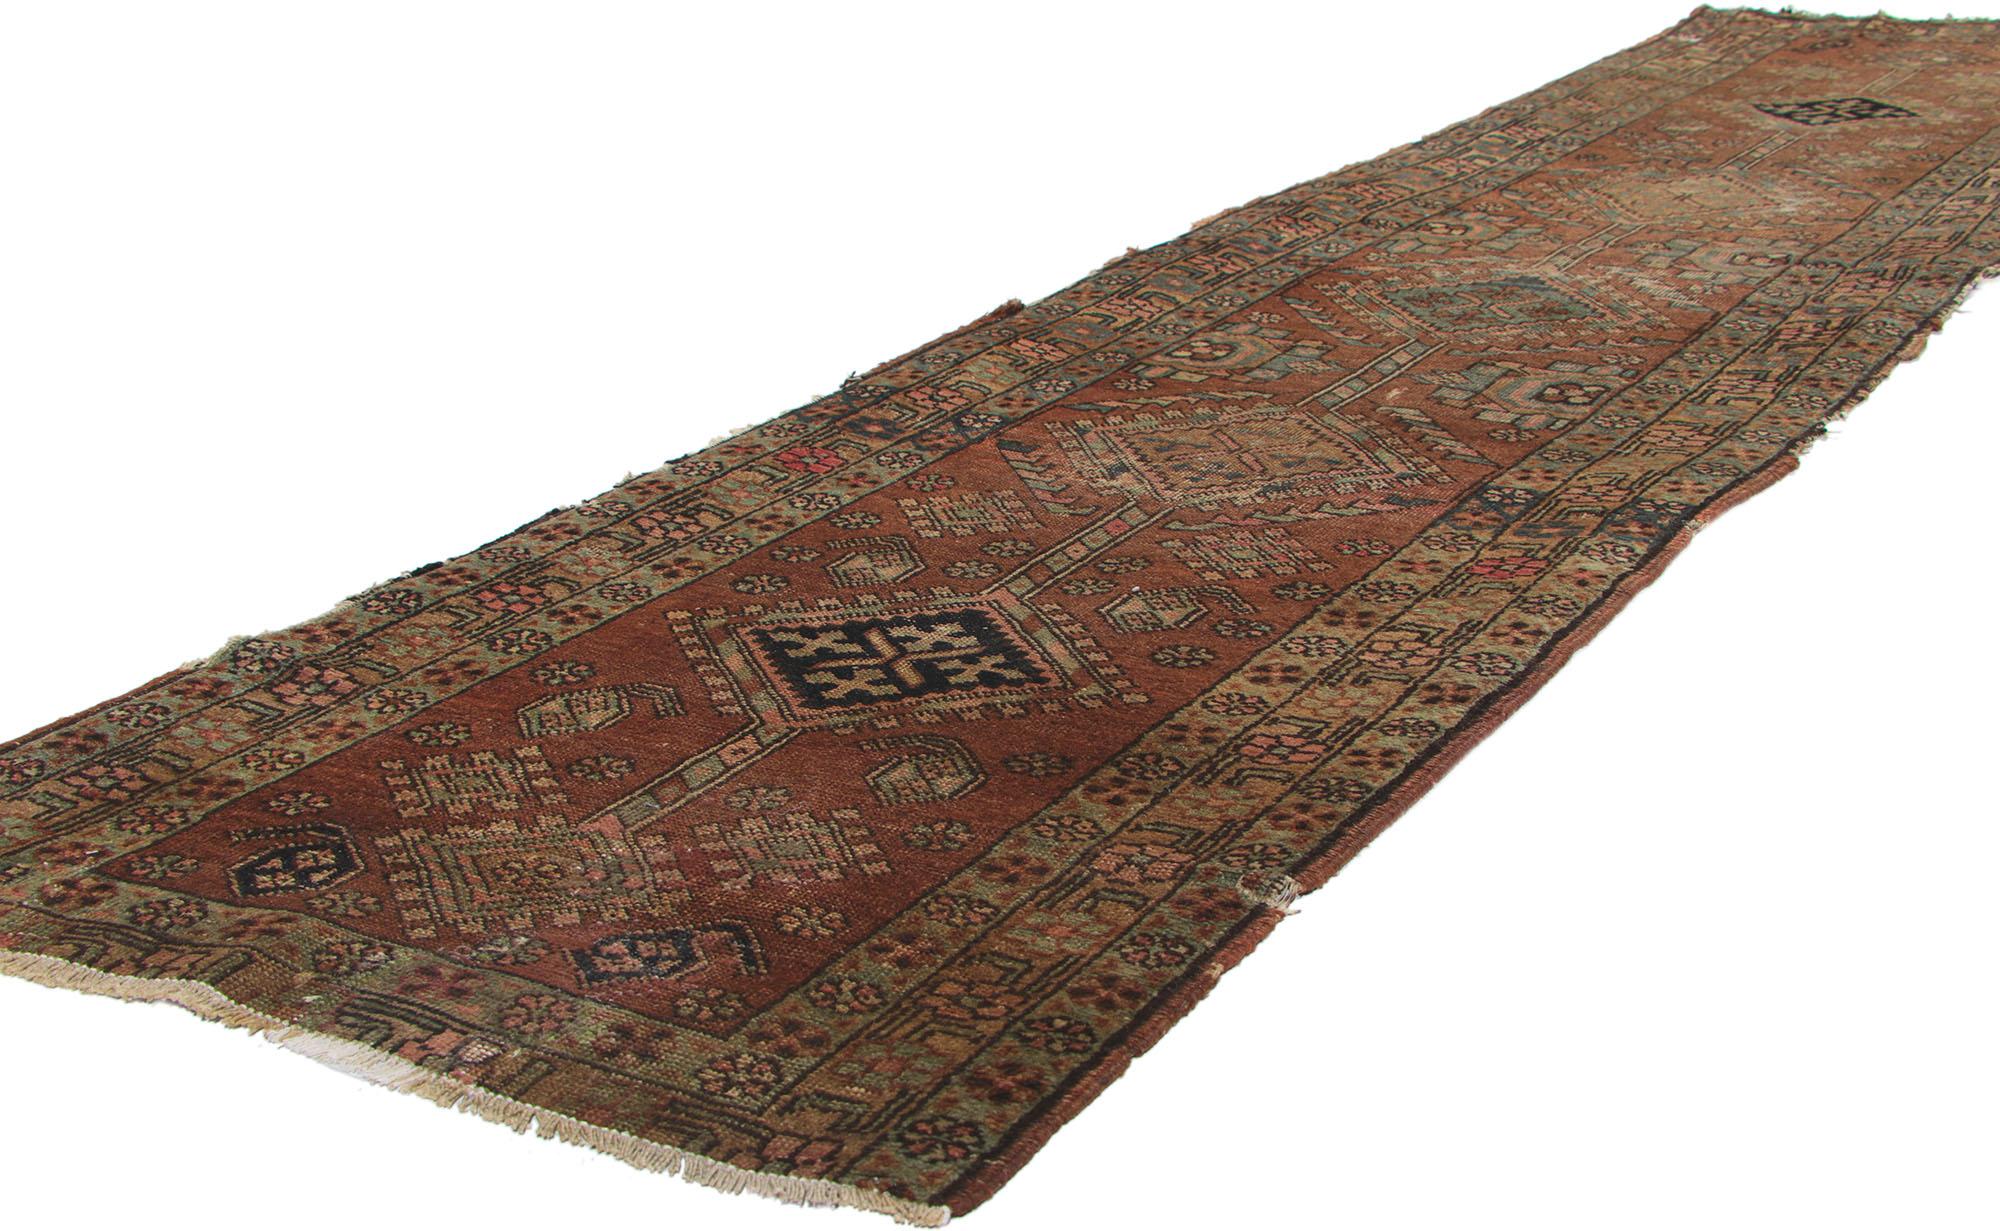 73166 Distressed Antique Persian Heriz Rug Runner, 02'04 x 10'00. Antique-worn Persian Heriz carpet runners are a unique category within the realm of Heriz rugs, distinguished by their aged, weathered appearance that have endured the passage of